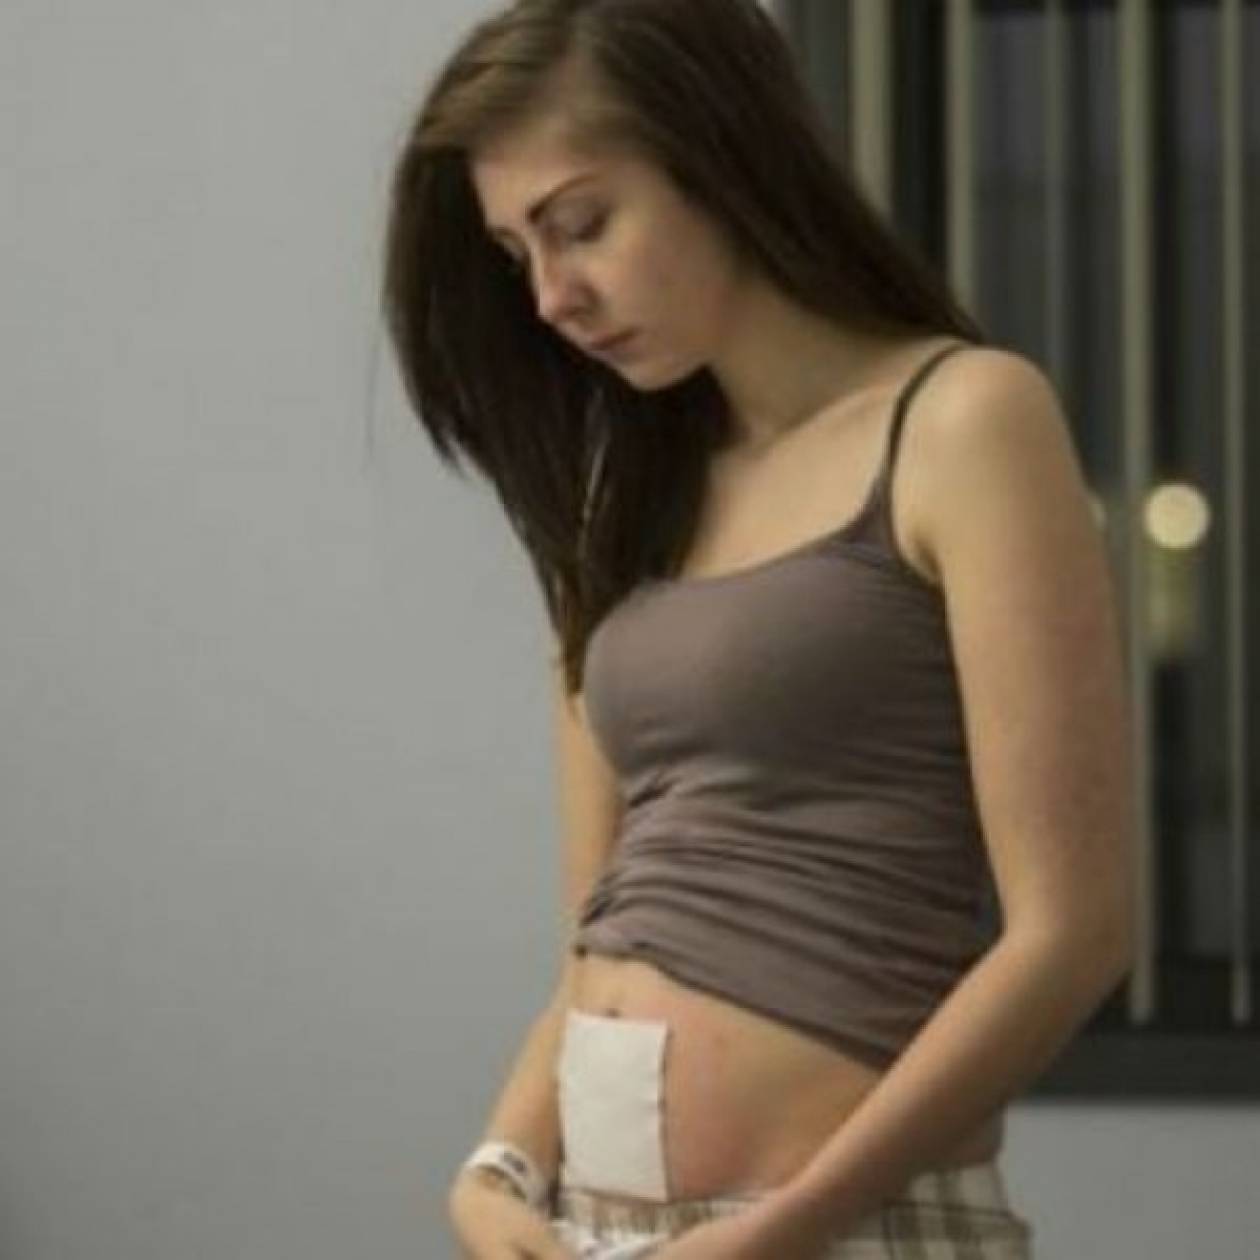 Young Teen Girls Getting Pregnant